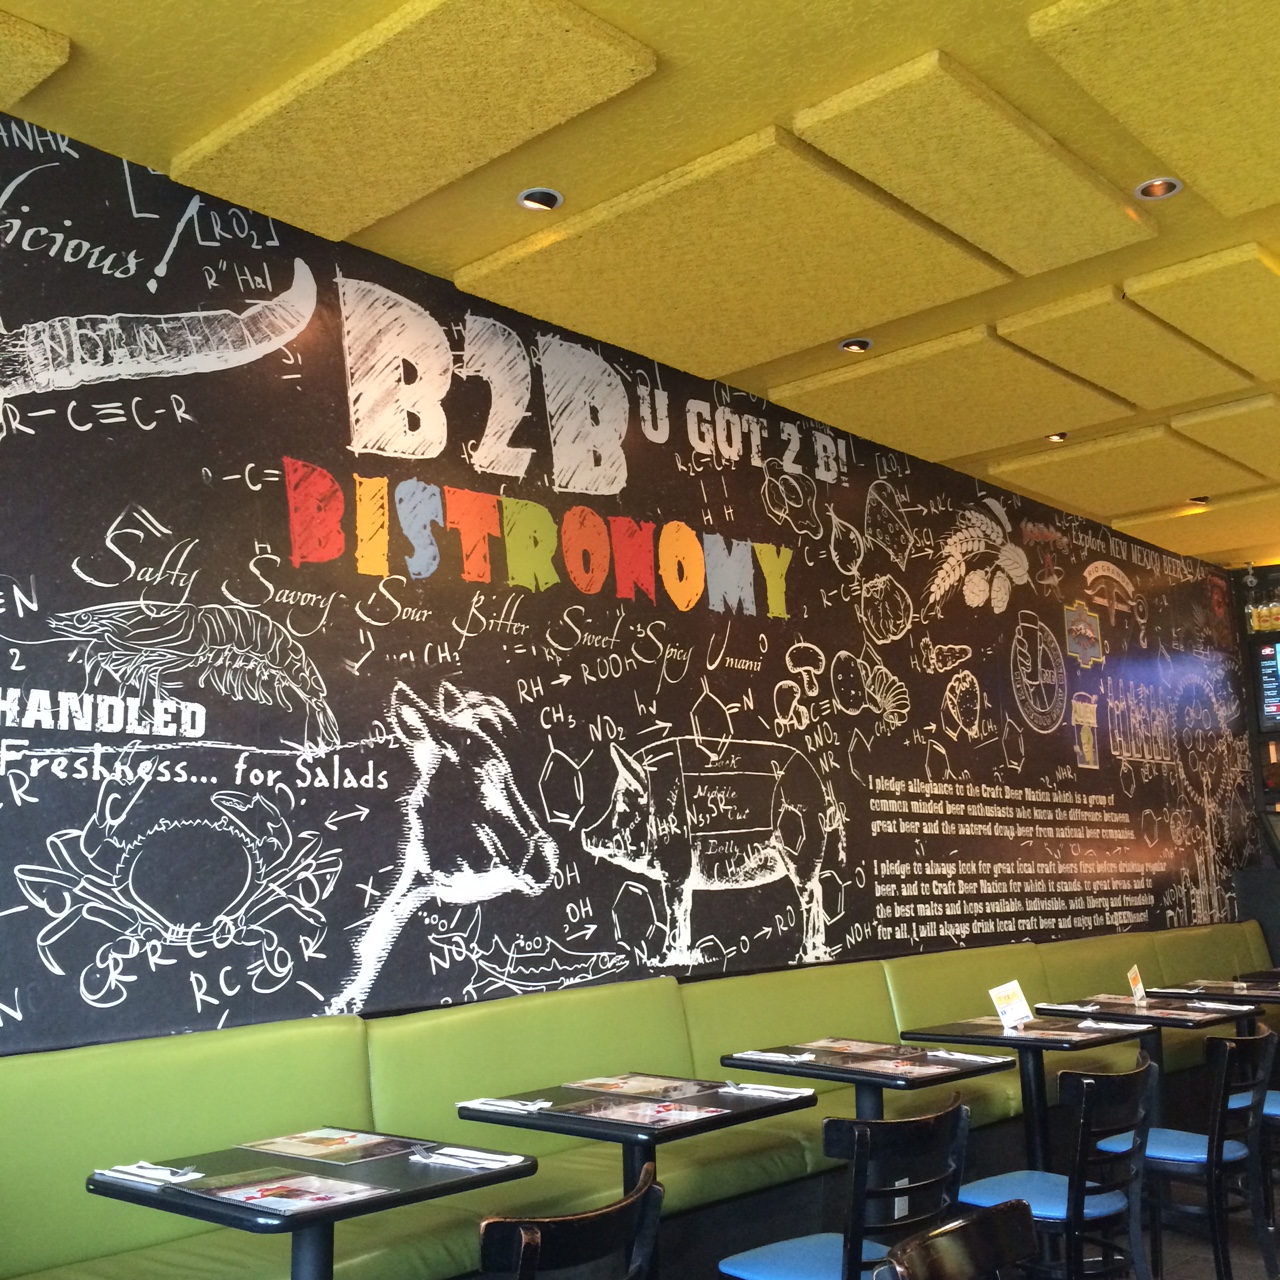 Lunching at Bistronomy B2B in Nob Hill | 50 Hours in a car